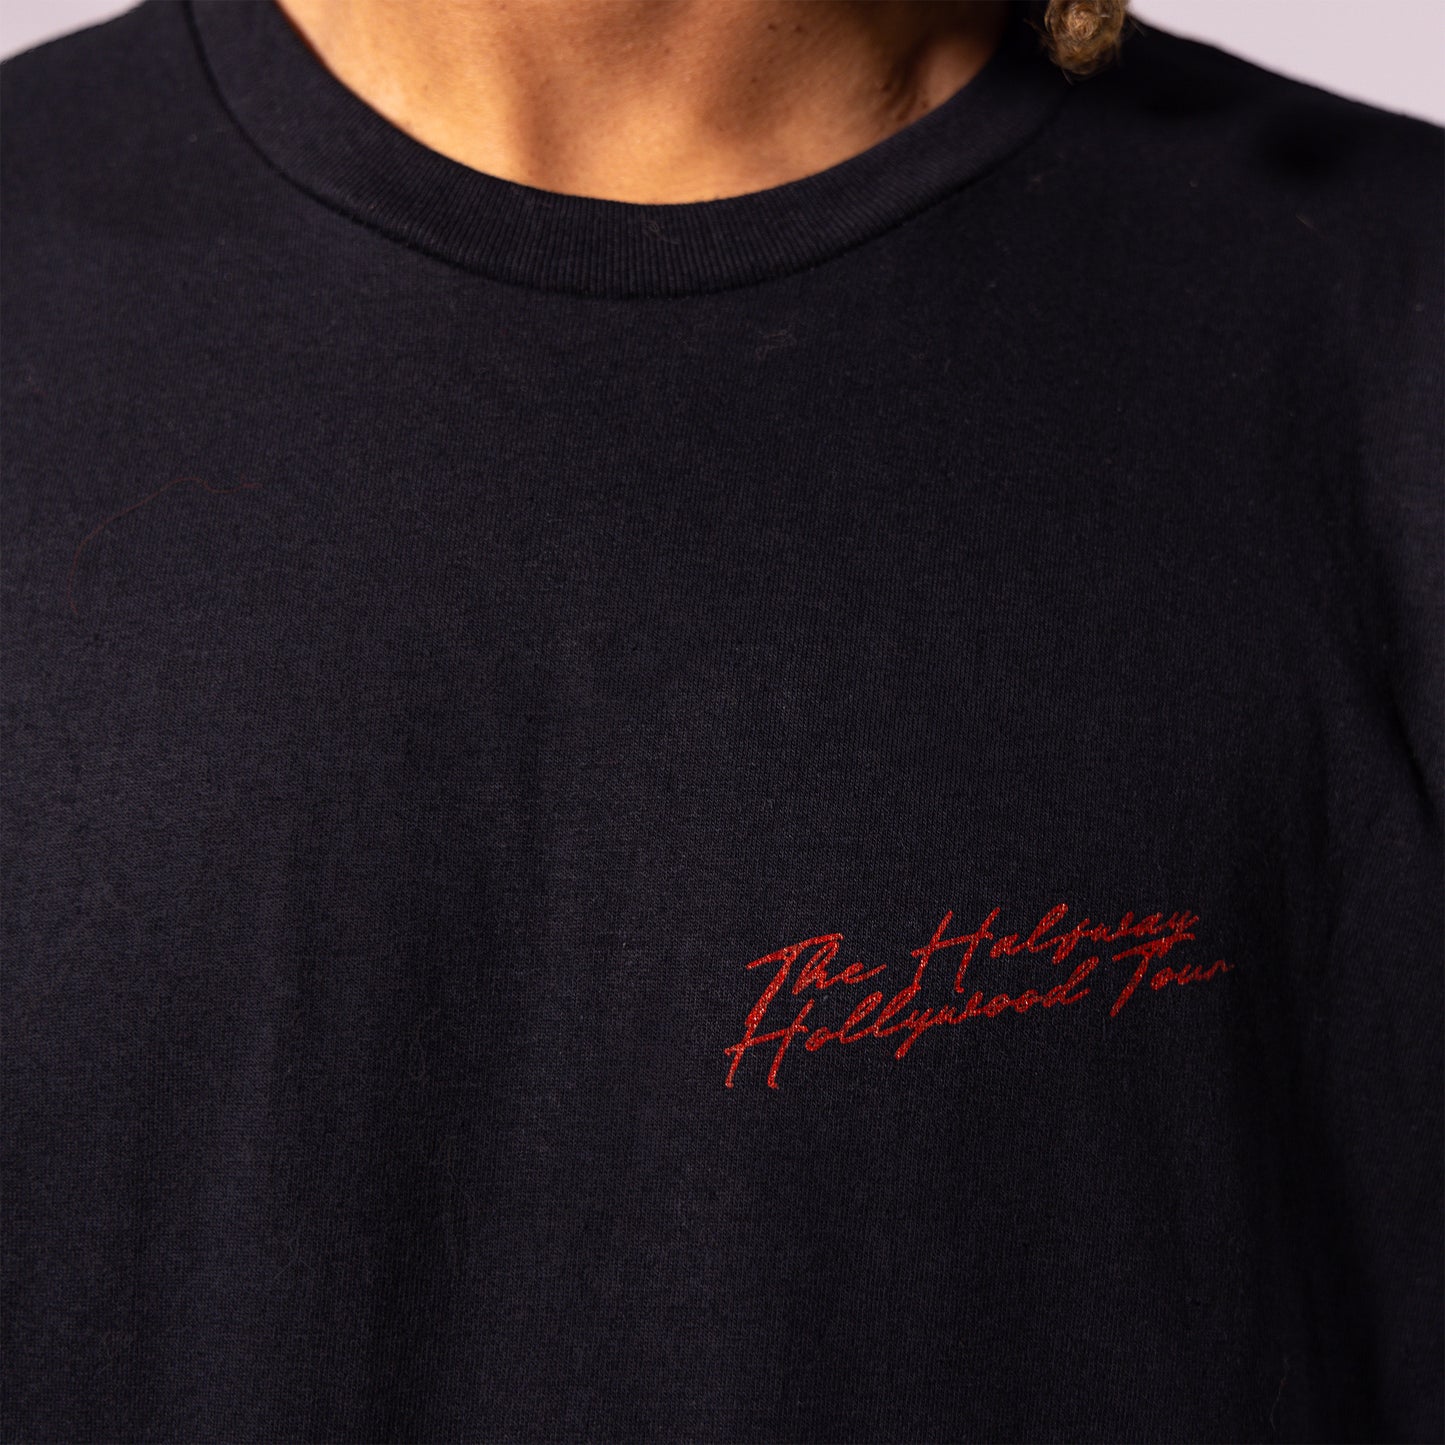 Halfway Hollywood Tour Tee LIMITED